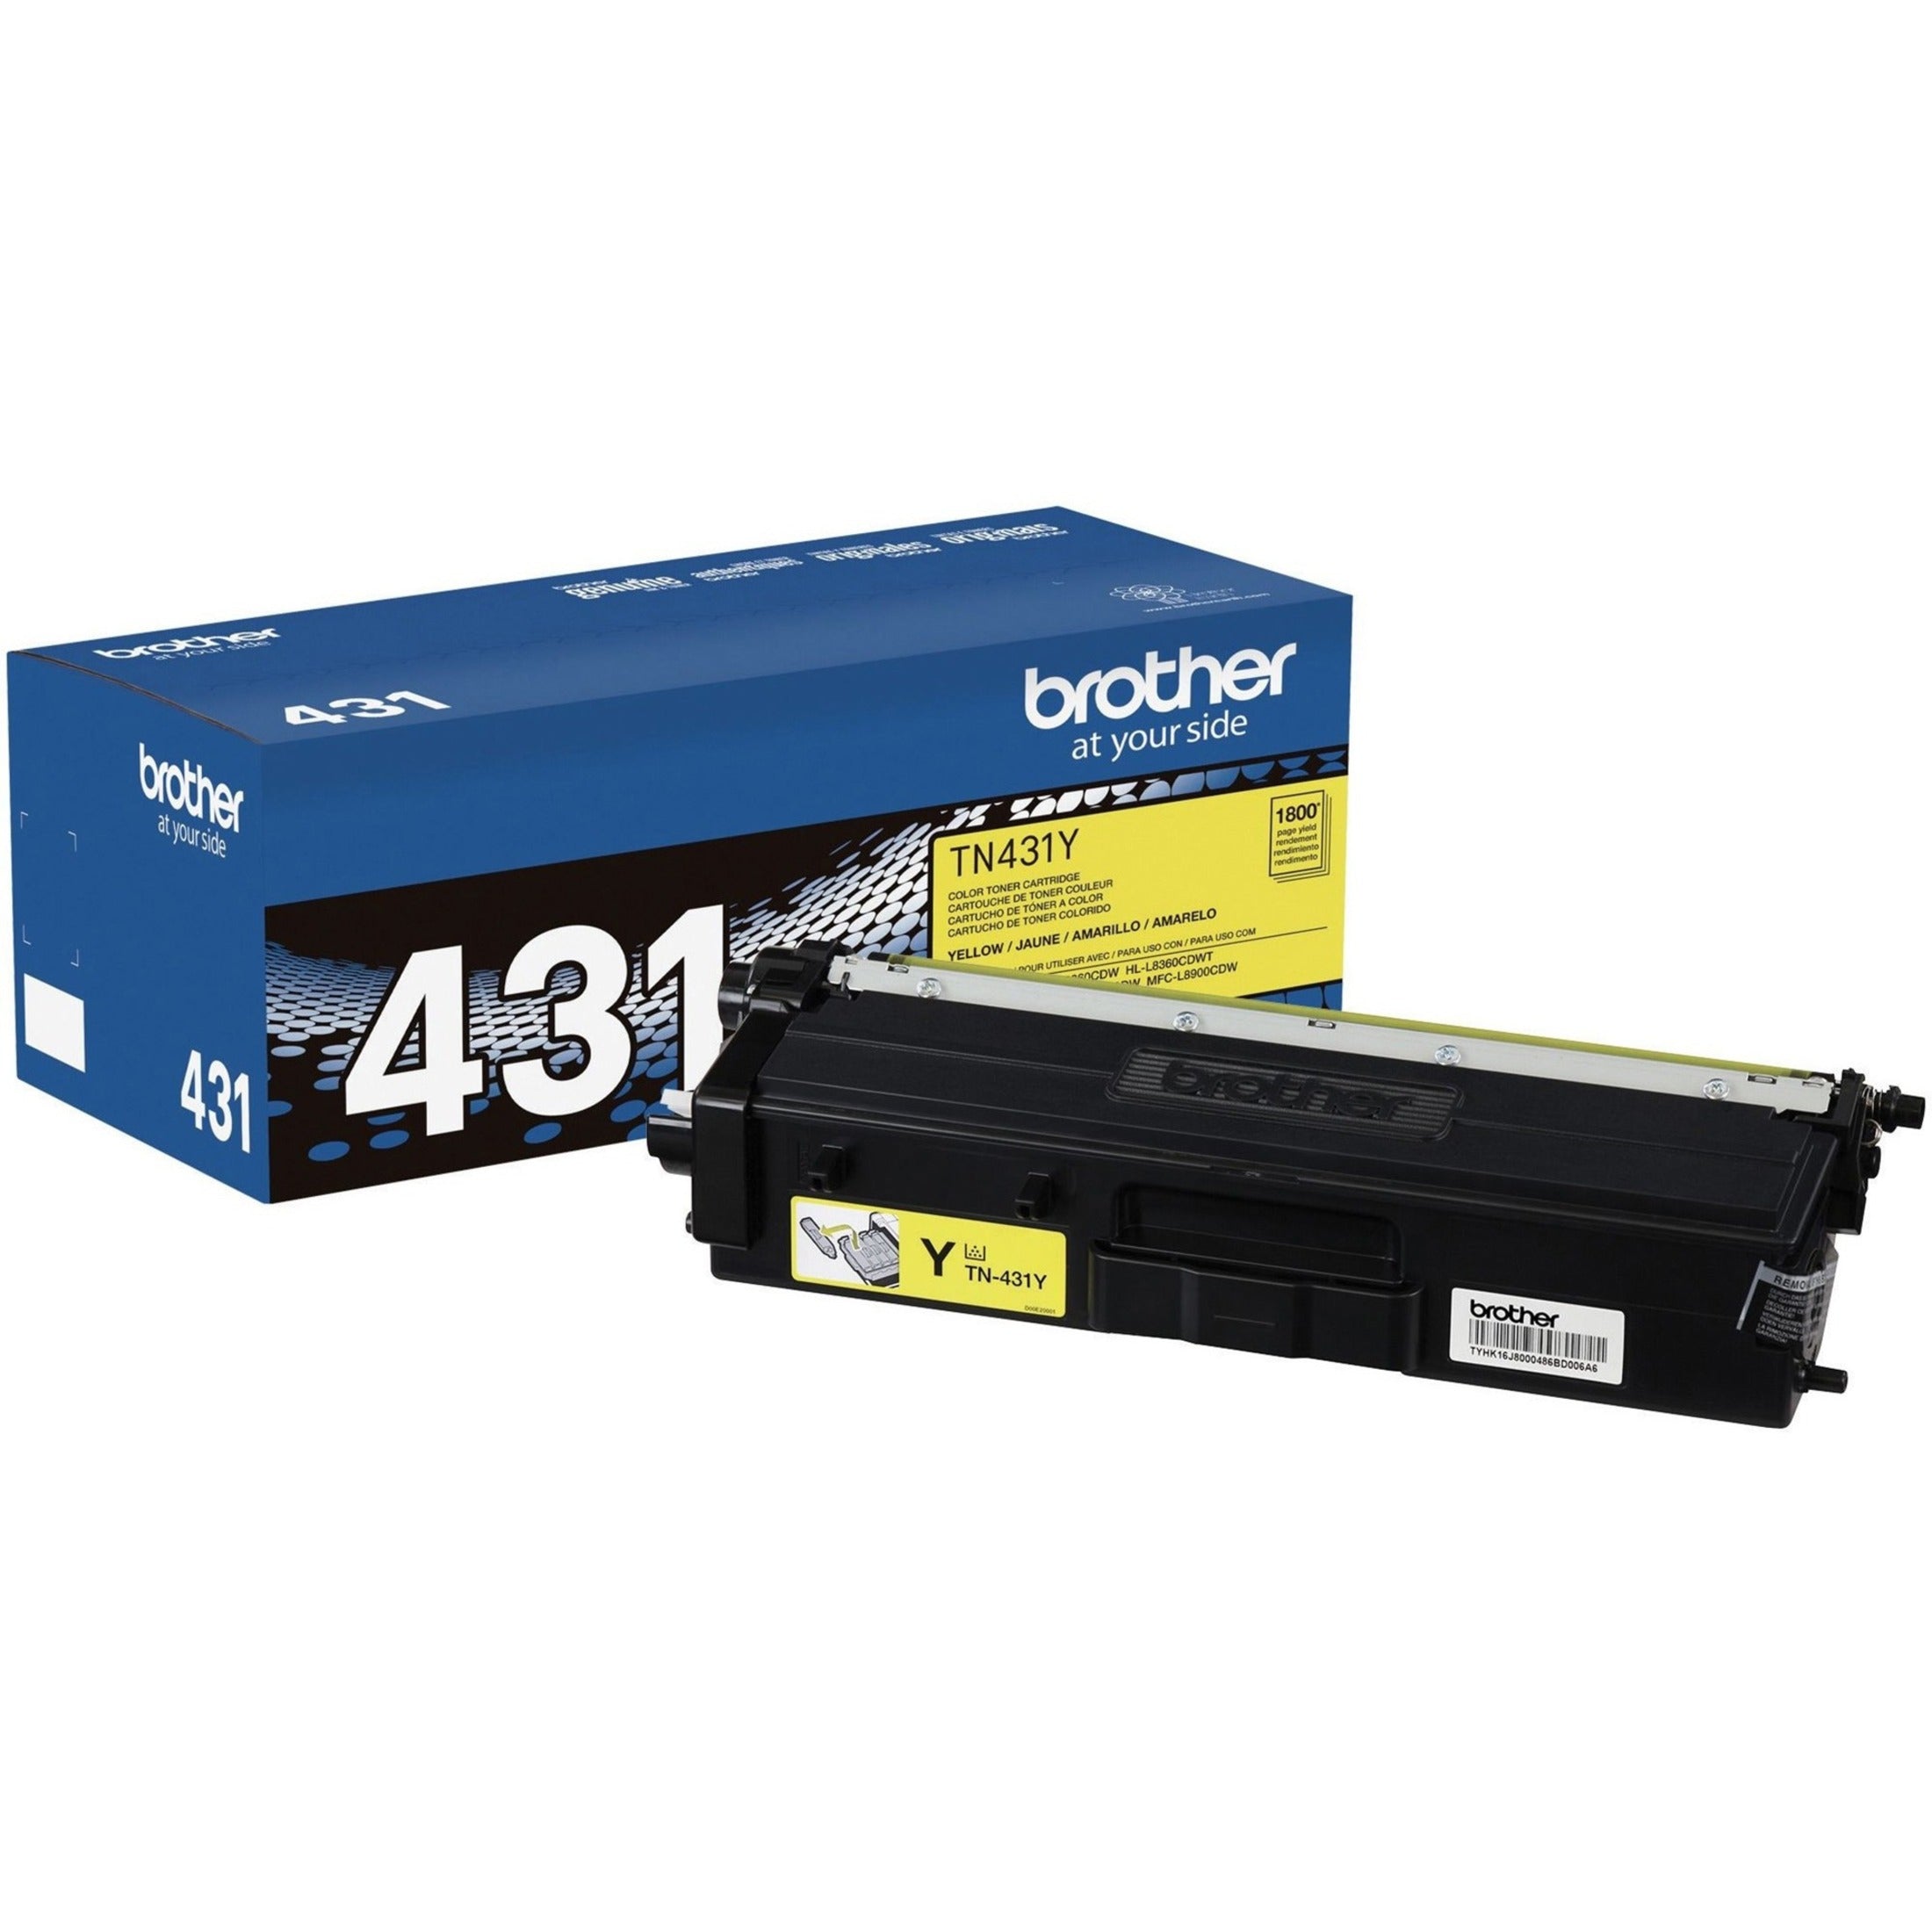 Brother TN431Y Toner Cartridge, 1800 Page Standard Yield, Yellow